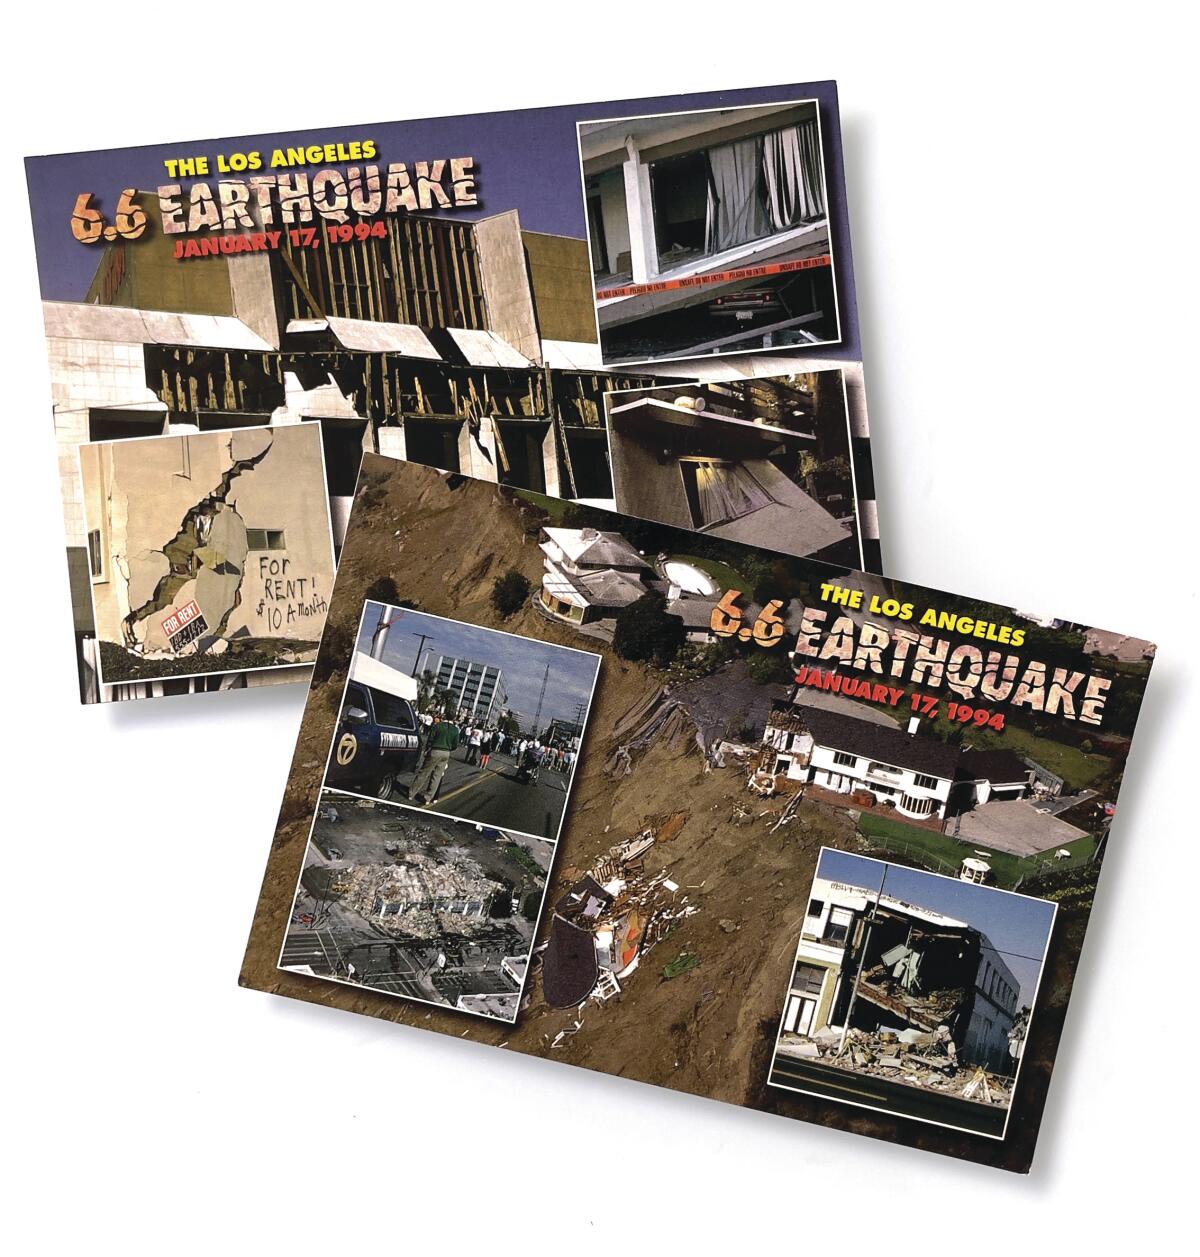 Postcards from Patt Morrison's collection show the damage from the 1994 Northridge earthquake